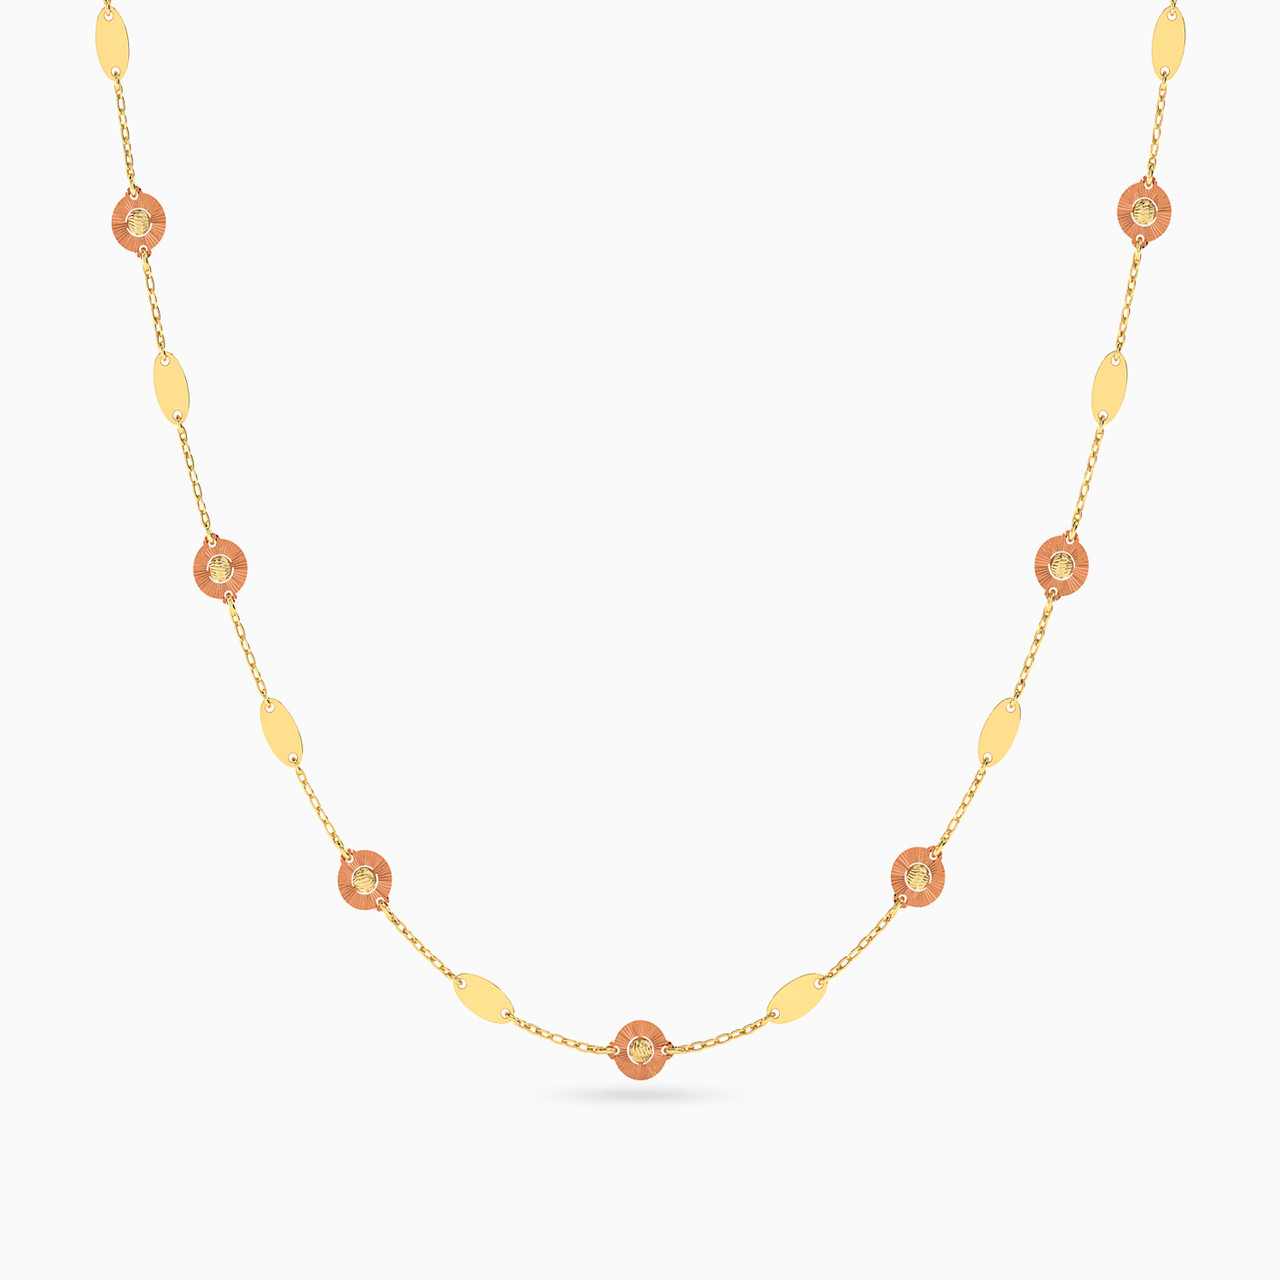 21K Gold Cubic Zirconia Chain Necklace